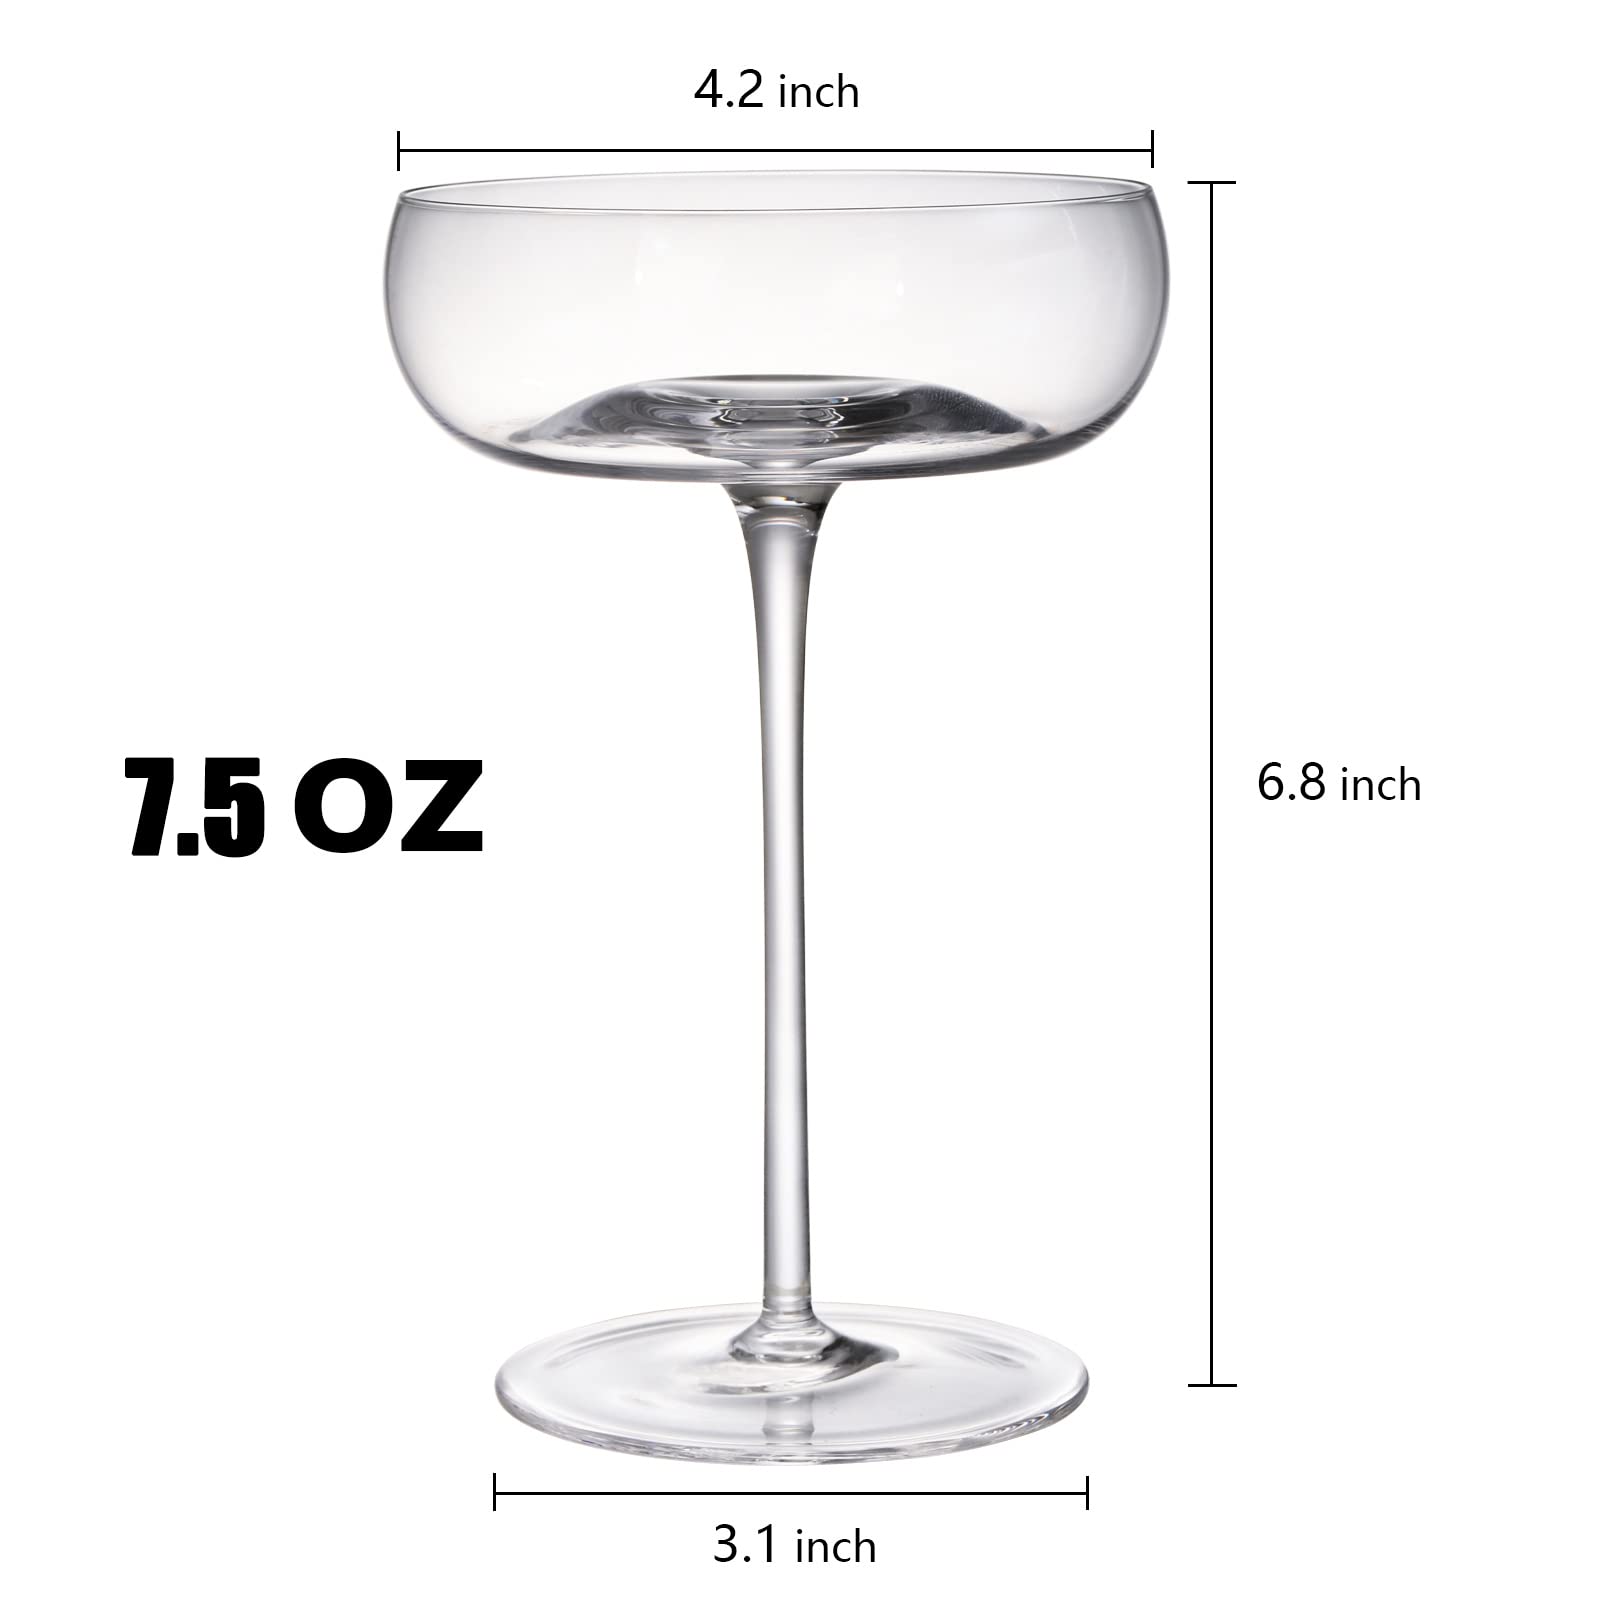 Coloch 4 Pack Cocktail Coupe Glasses with Stem, 7oz Crystal Tall Martini Glasses Vintage Champagne Coupe Glassware for Cocktail, Martini, Margarita, Champagne, Party, Catering, Wedding